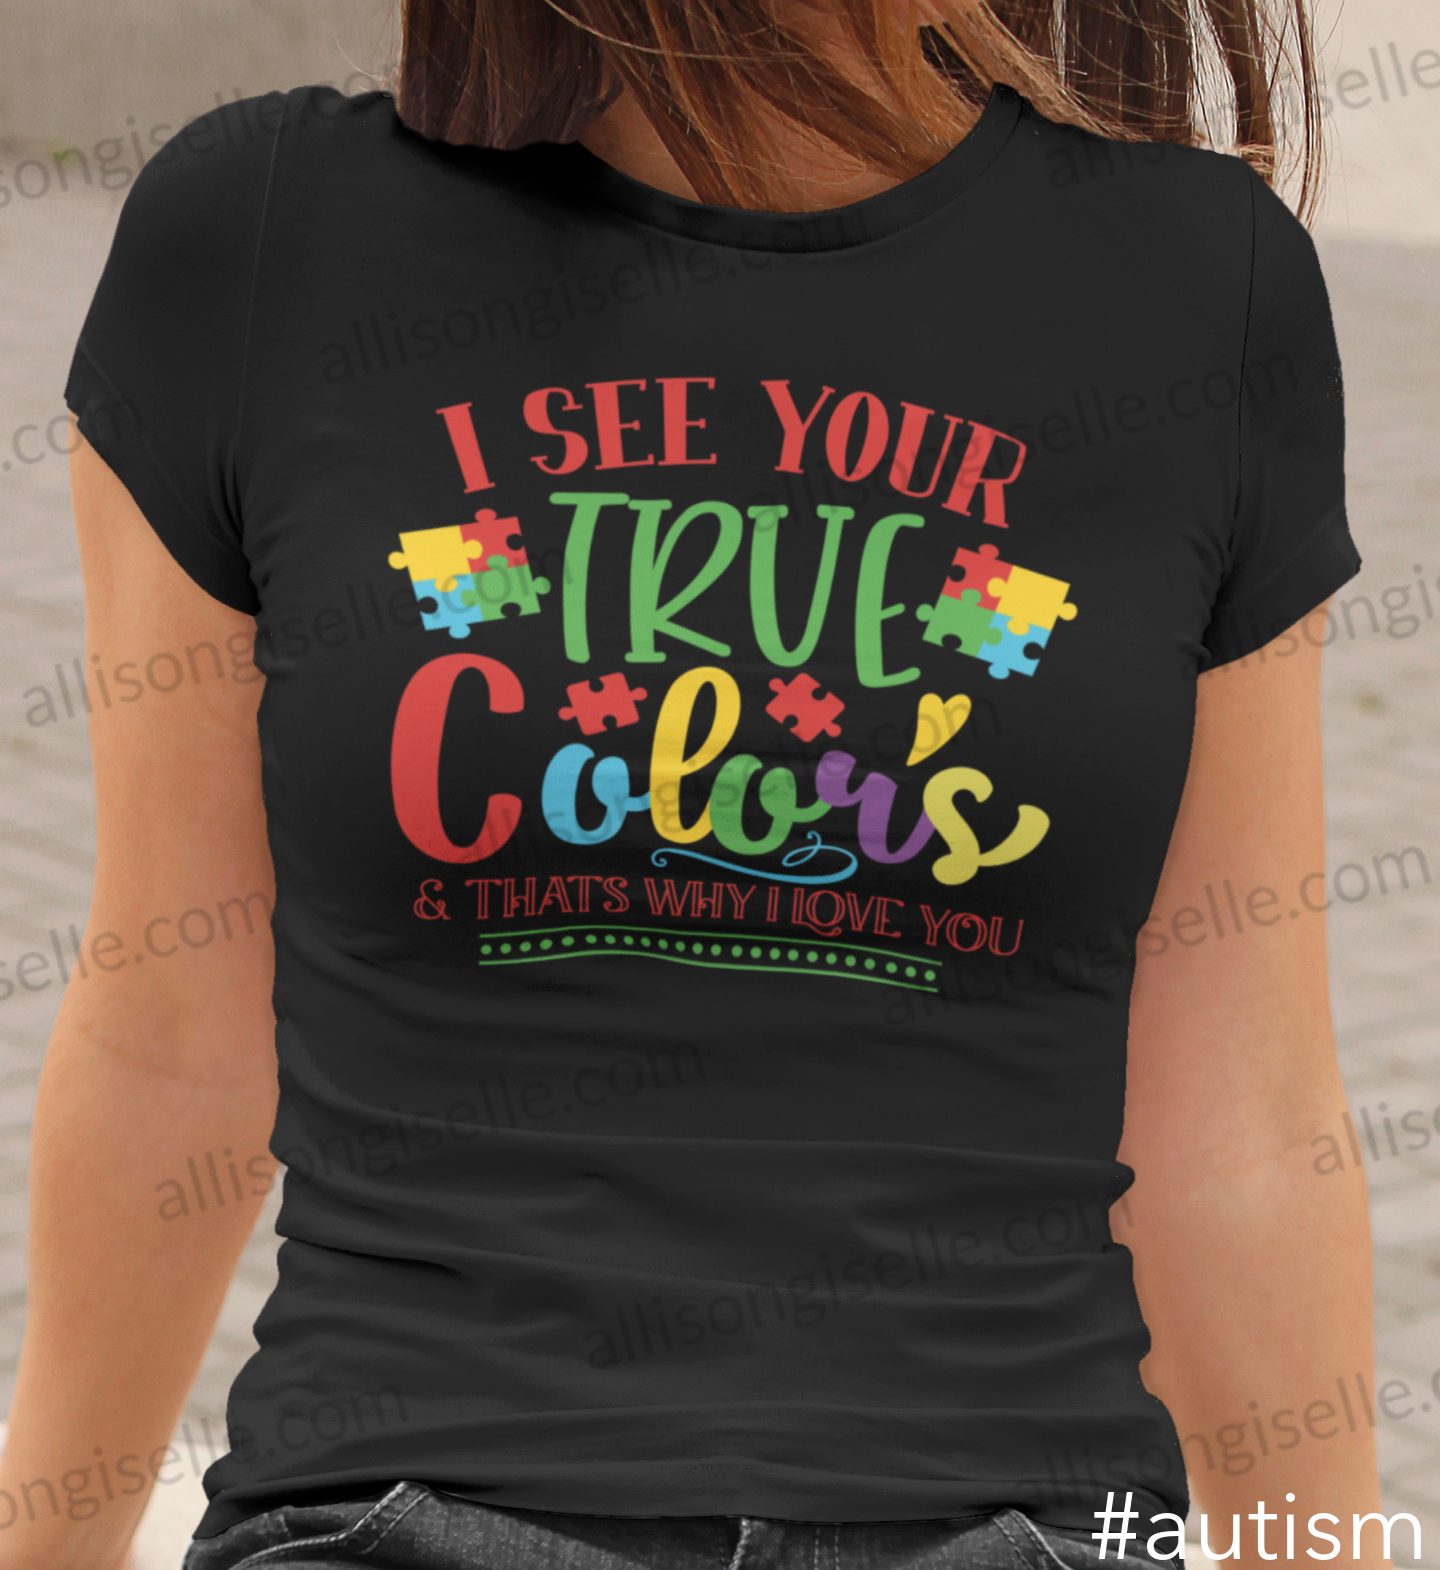 I See Your True Colors That's Why I Love You Autism Shirt, Adult Autism Awareness shirts, Autism Shirt Adult